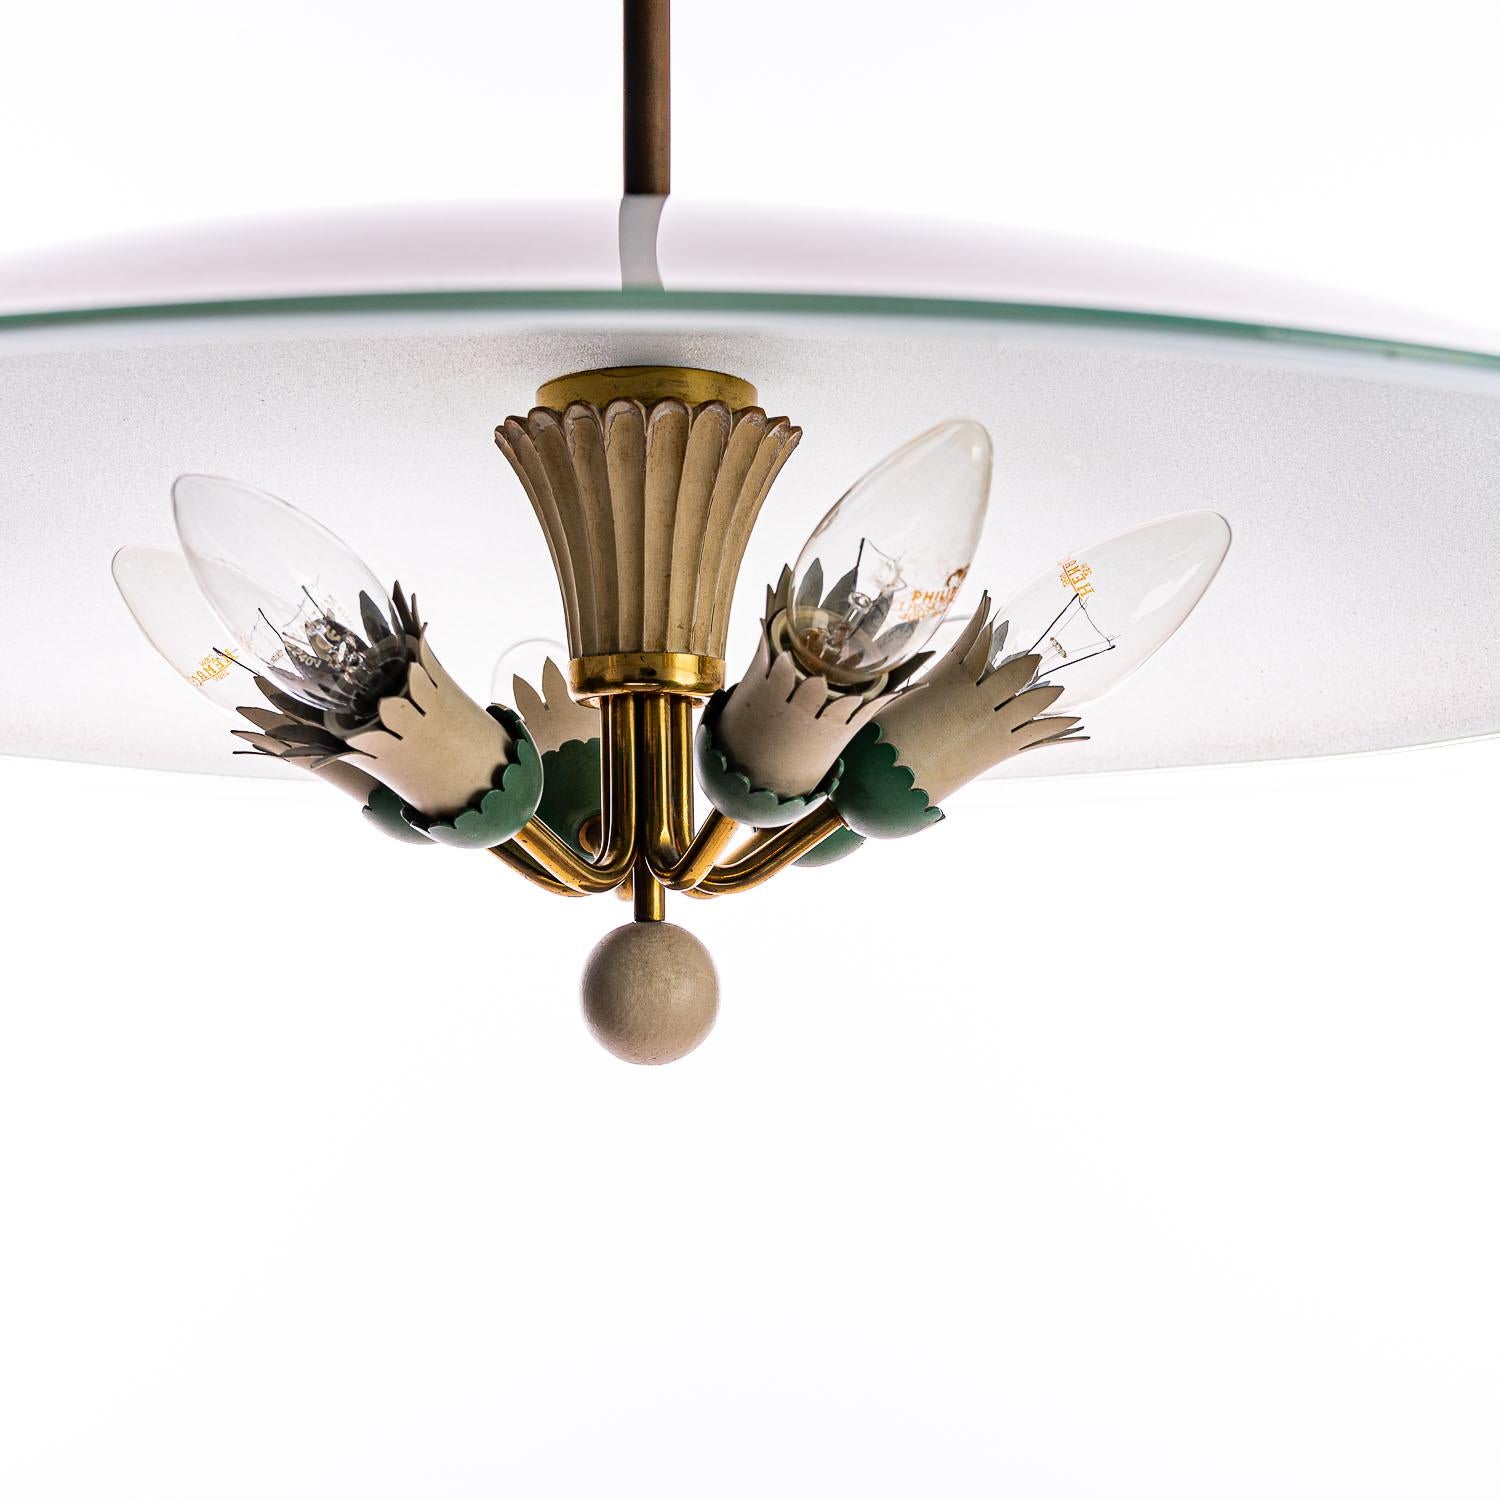 This elegant, surprisingly large pendant light consisting of a brass frame and one unique large glass reflector. In the center 6 electrical E14 polychromed metal sockets and a brass stem.

Please note, we have multiple ‘saucer’- lighting in stock.